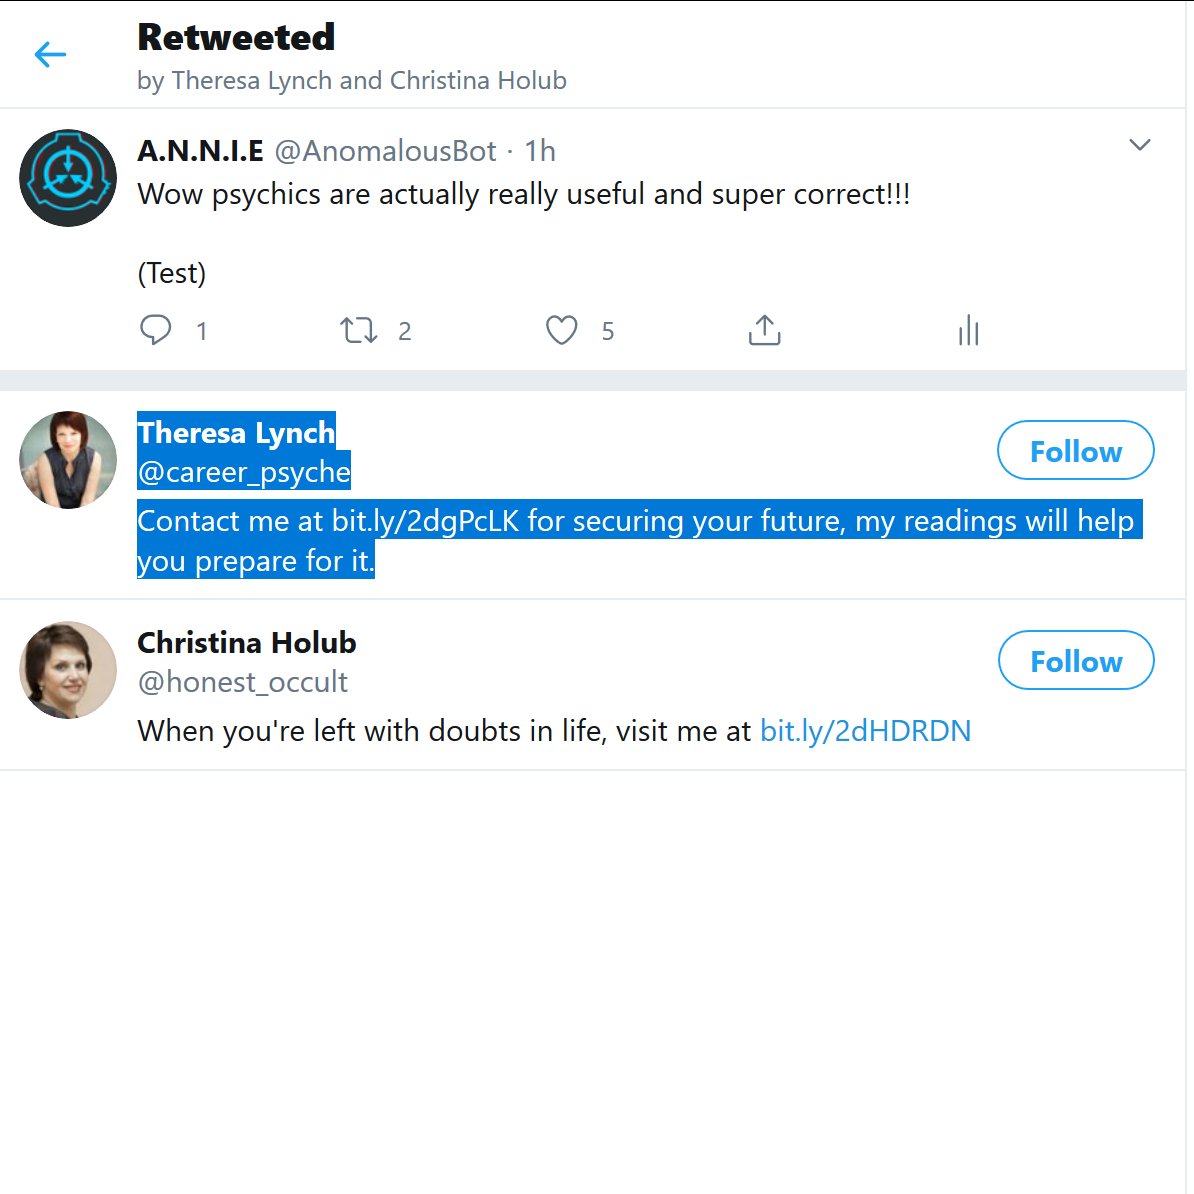 While writing this thread another bot has retweeted my test tweet lol